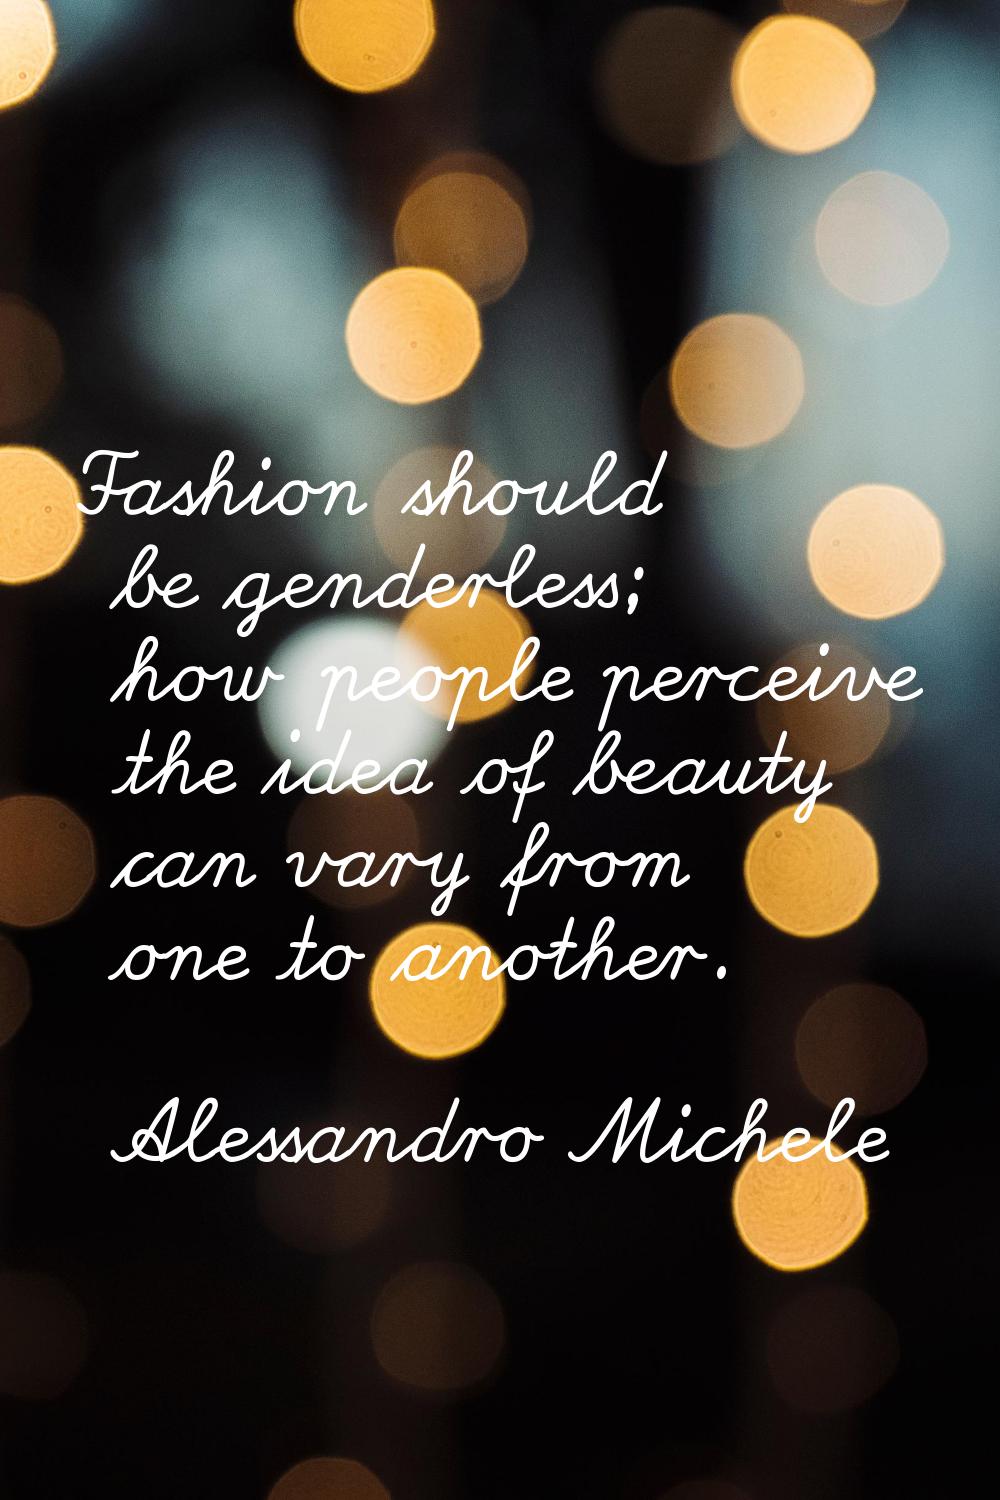 Fashion should be genderless; how people perceive the idea of beauty can vary from one to another.